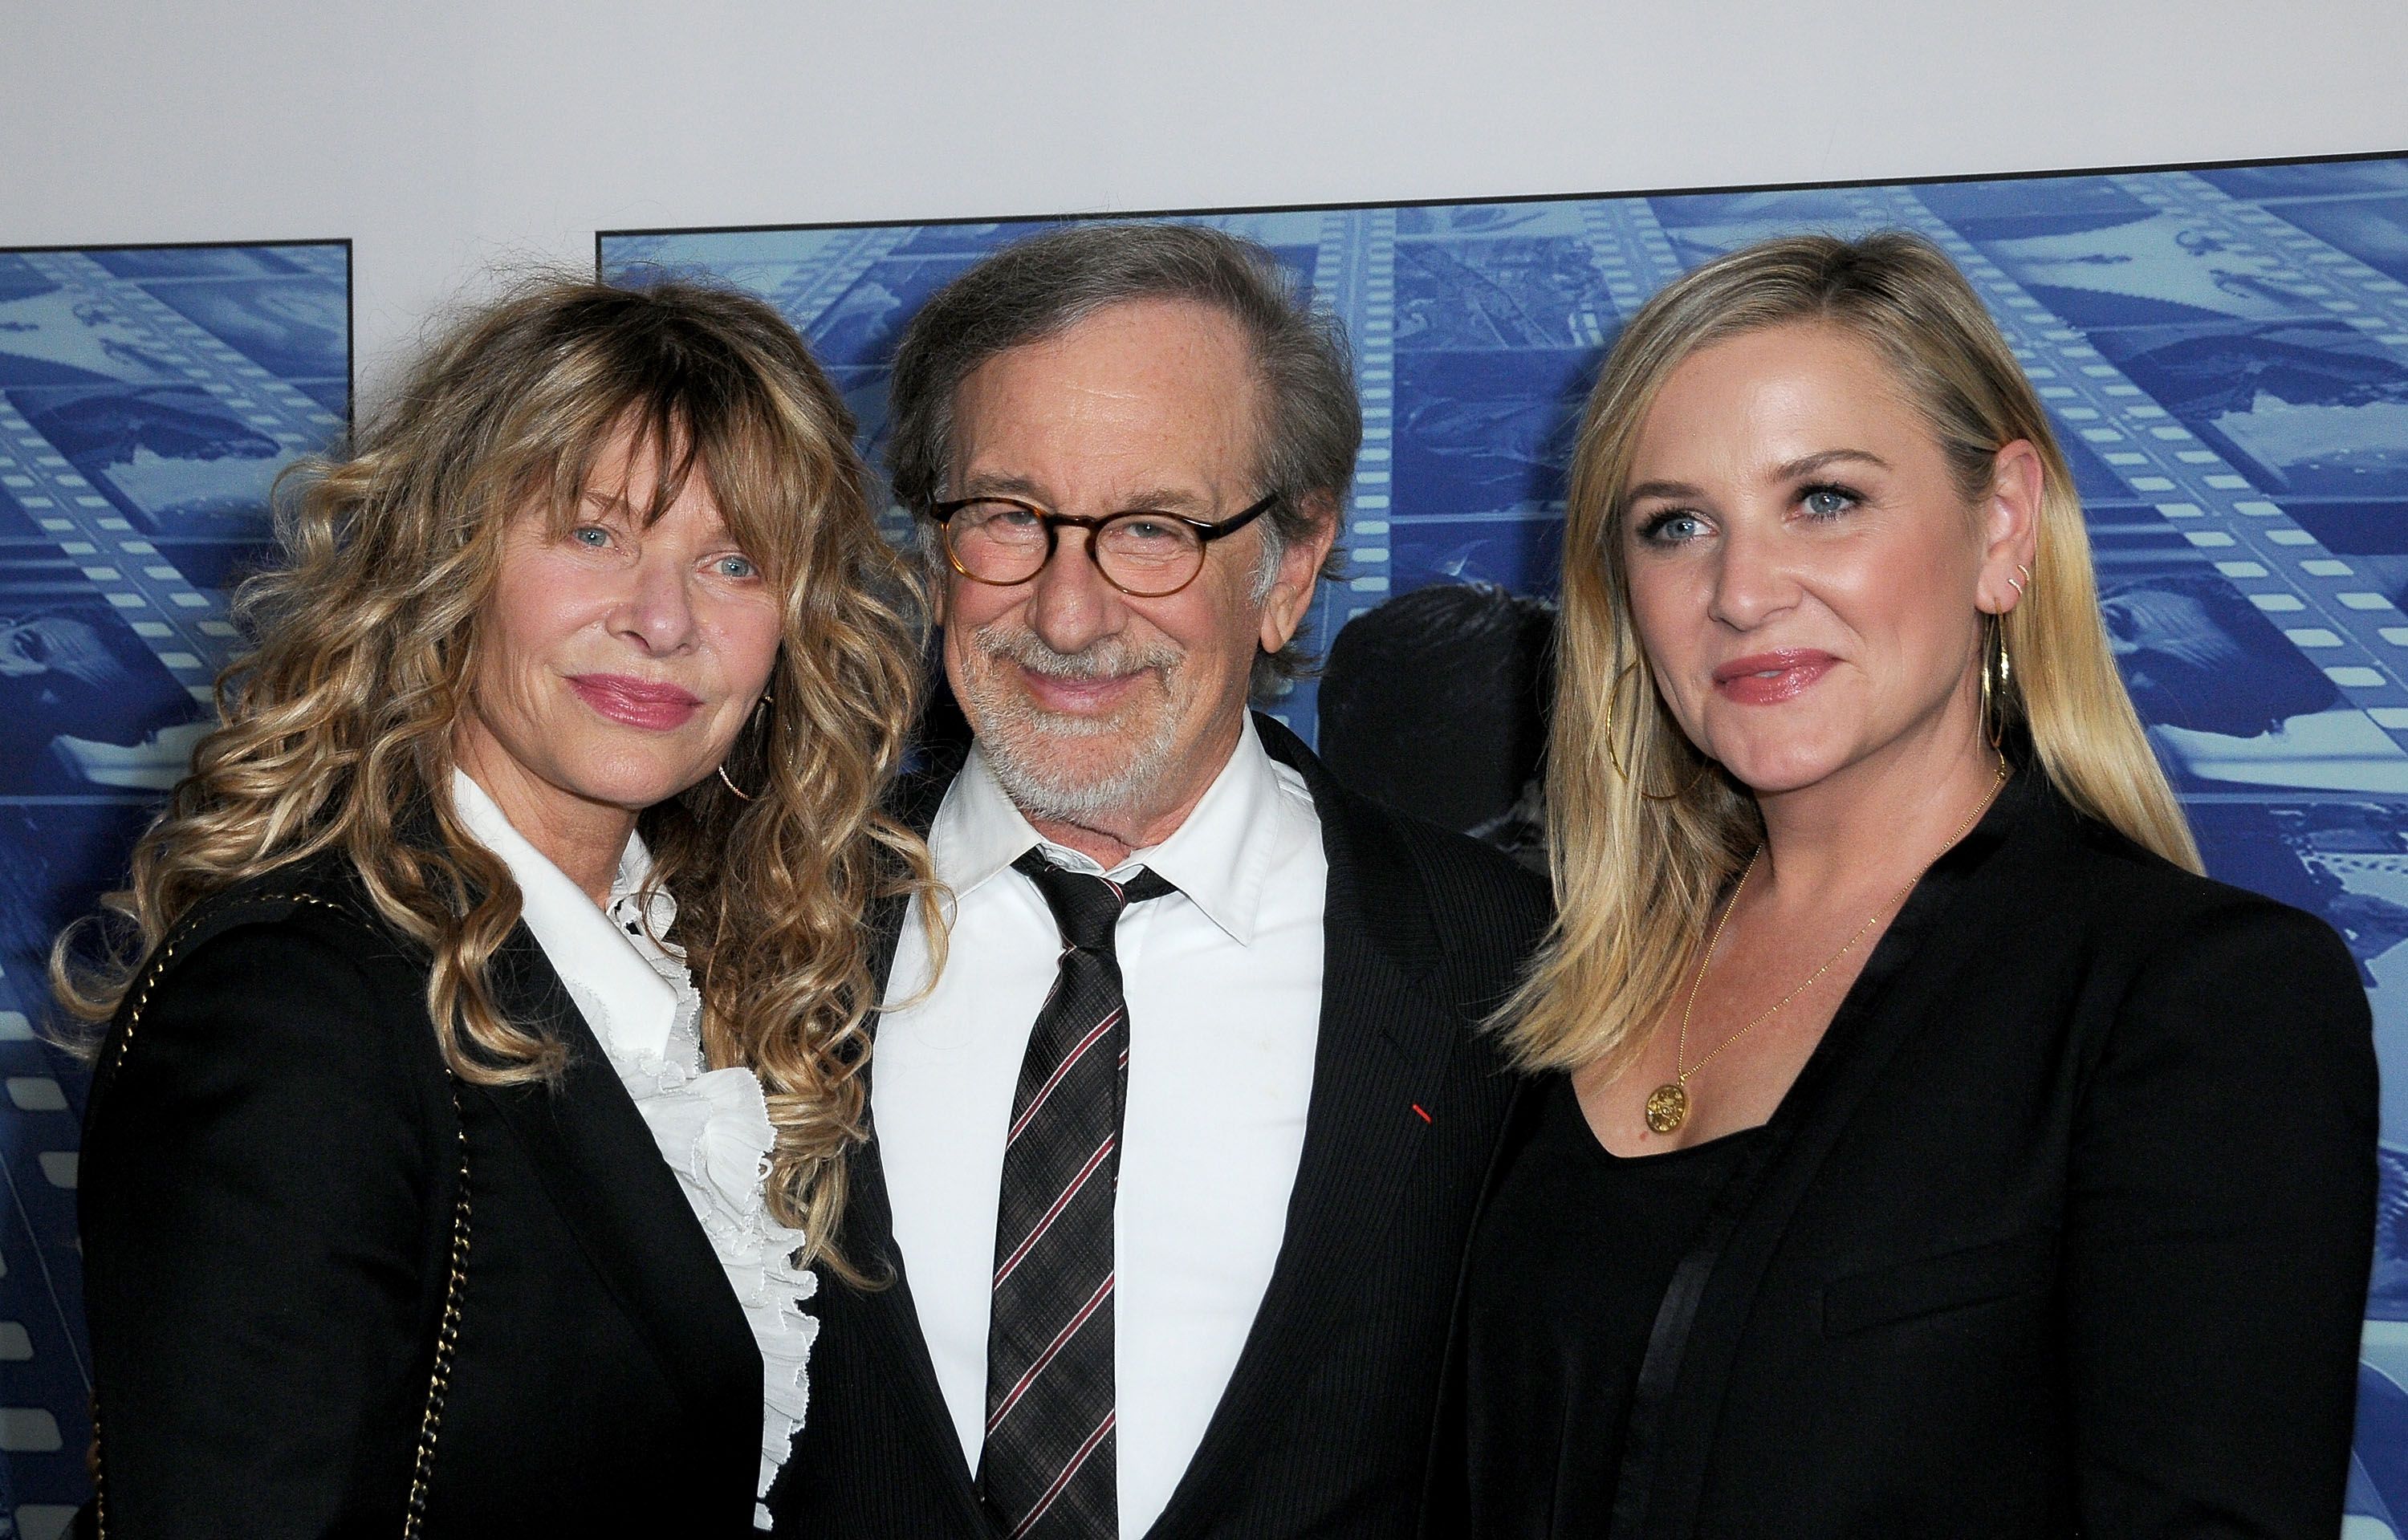 Jessica Capshaw with Kate Capshaw, and Steven Spielberg at the premiere of HBO's 'Spielberg' in 2017 in Hollywood | Source: Getty Images